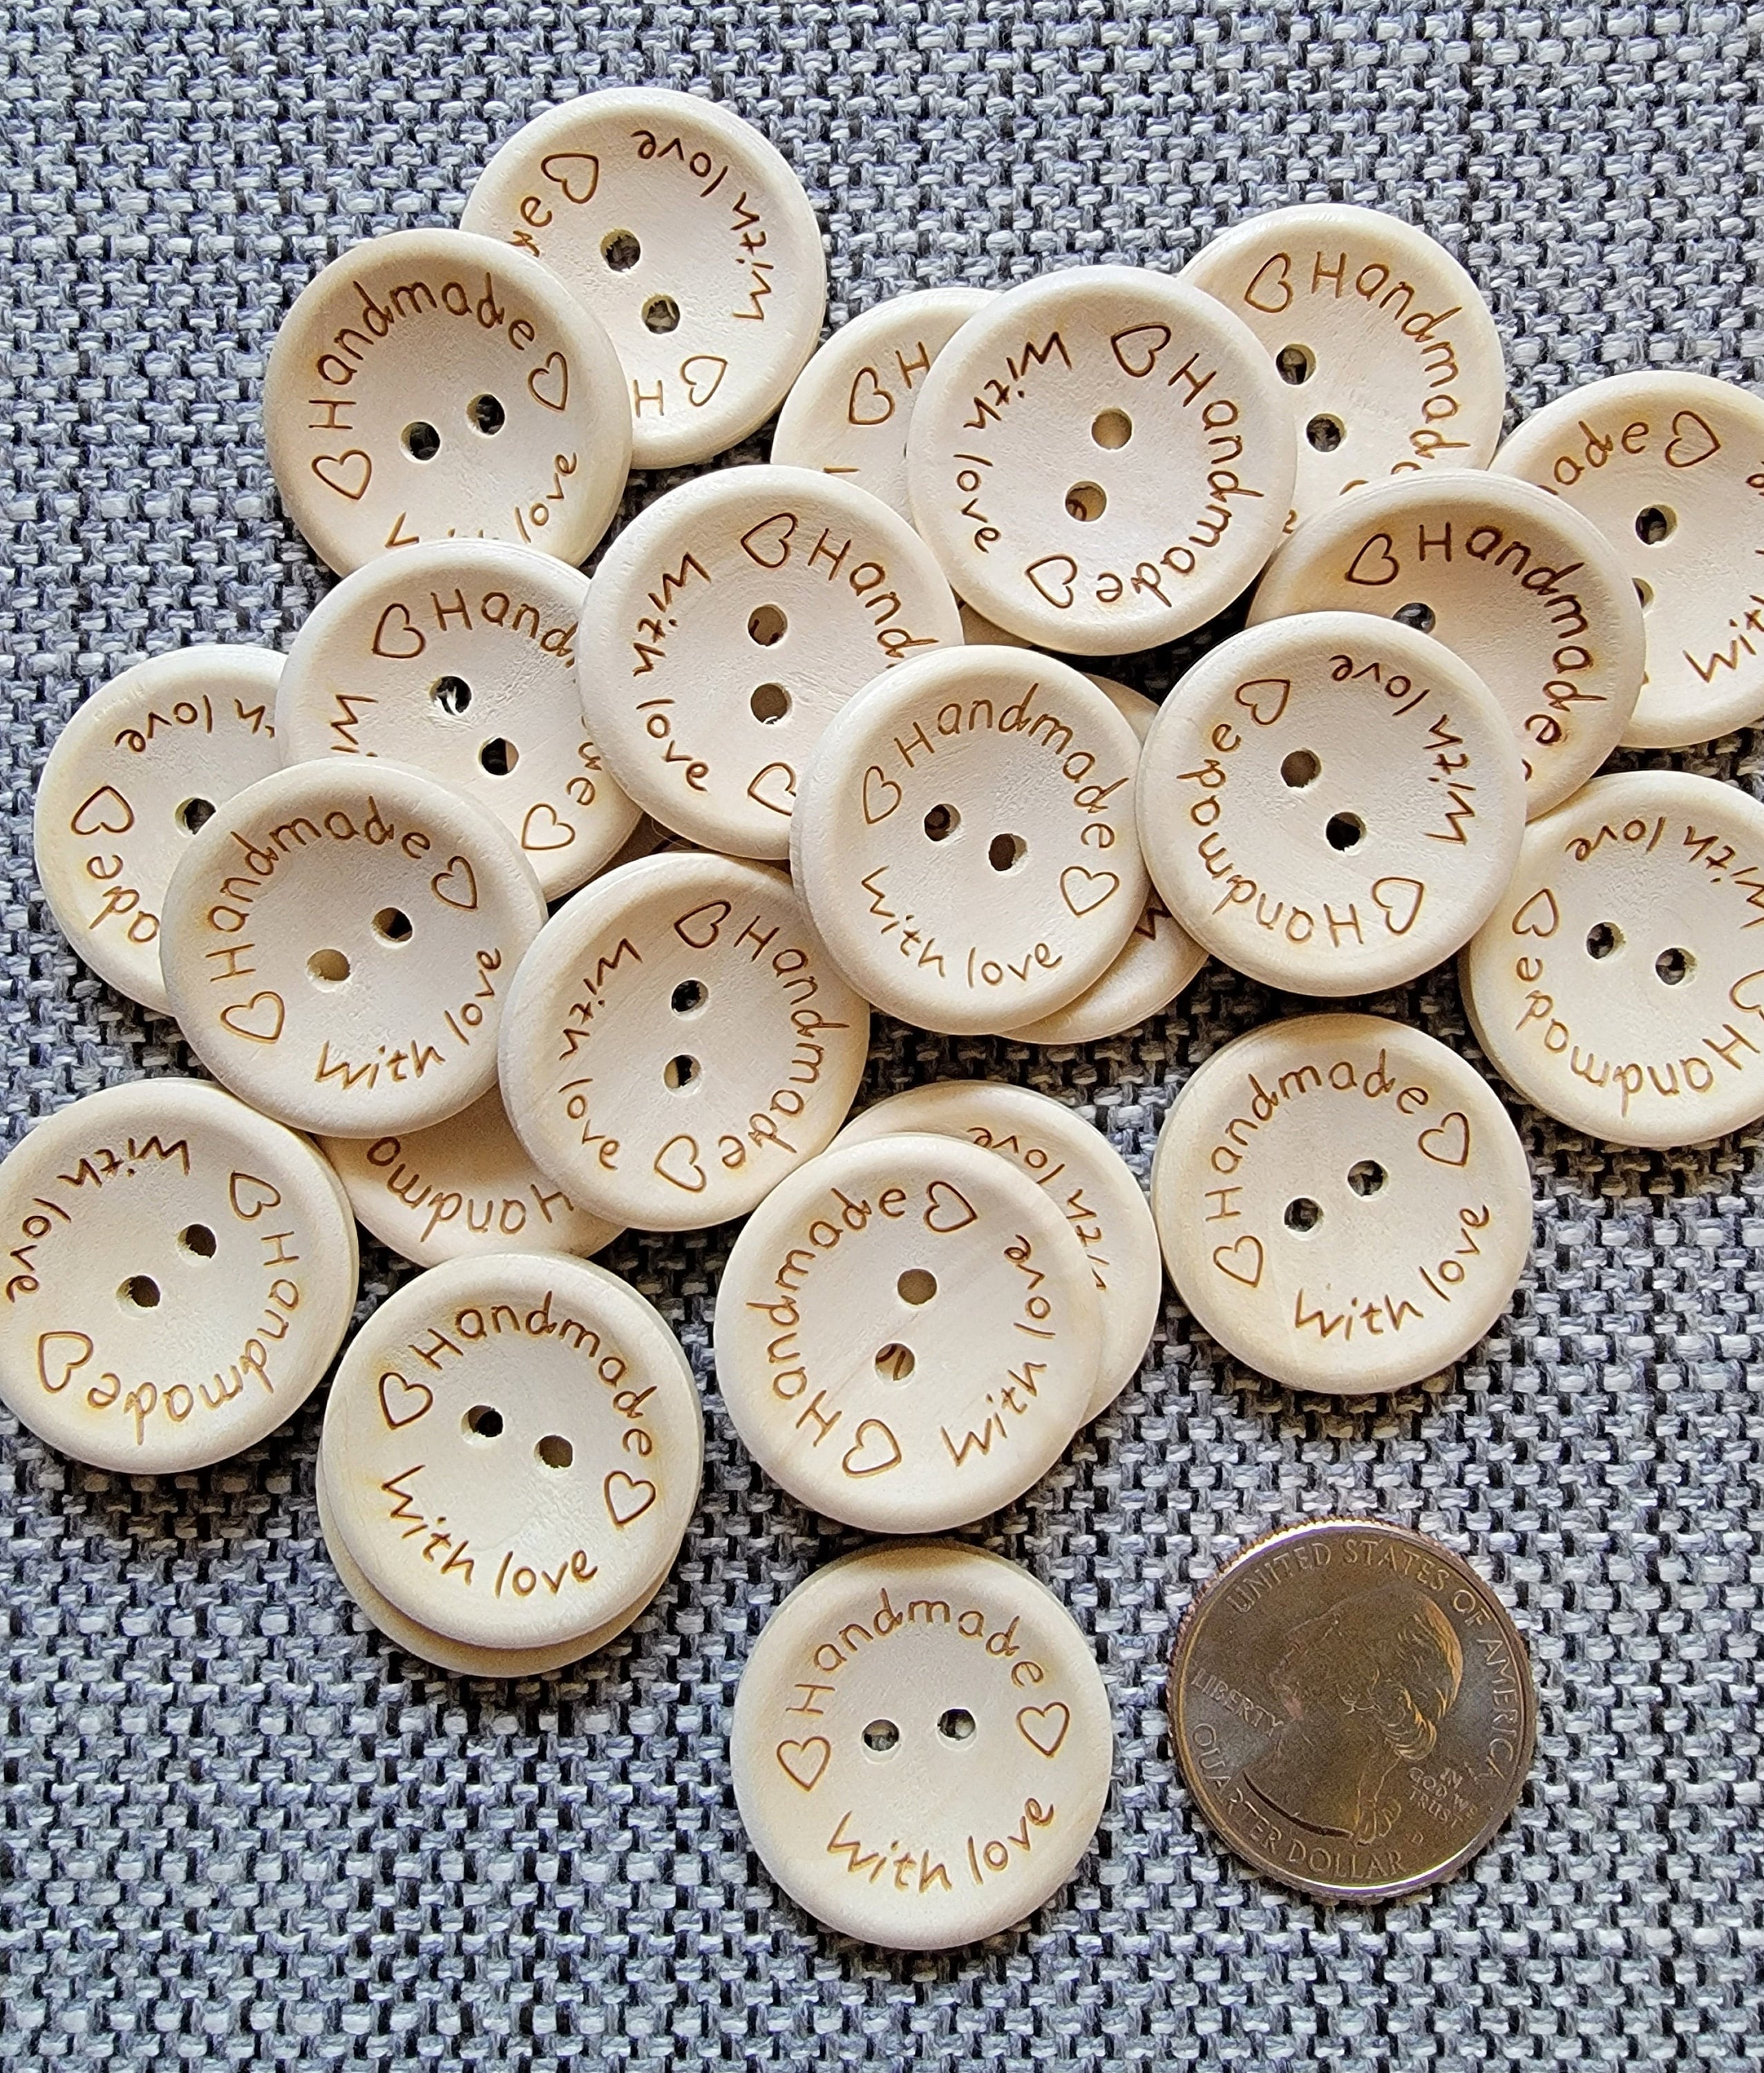 Handmade With Love Buttons, 25mm Wood Buttons, 25mm Handmade Buttons, 1  Inch Round Wooden Buttons 